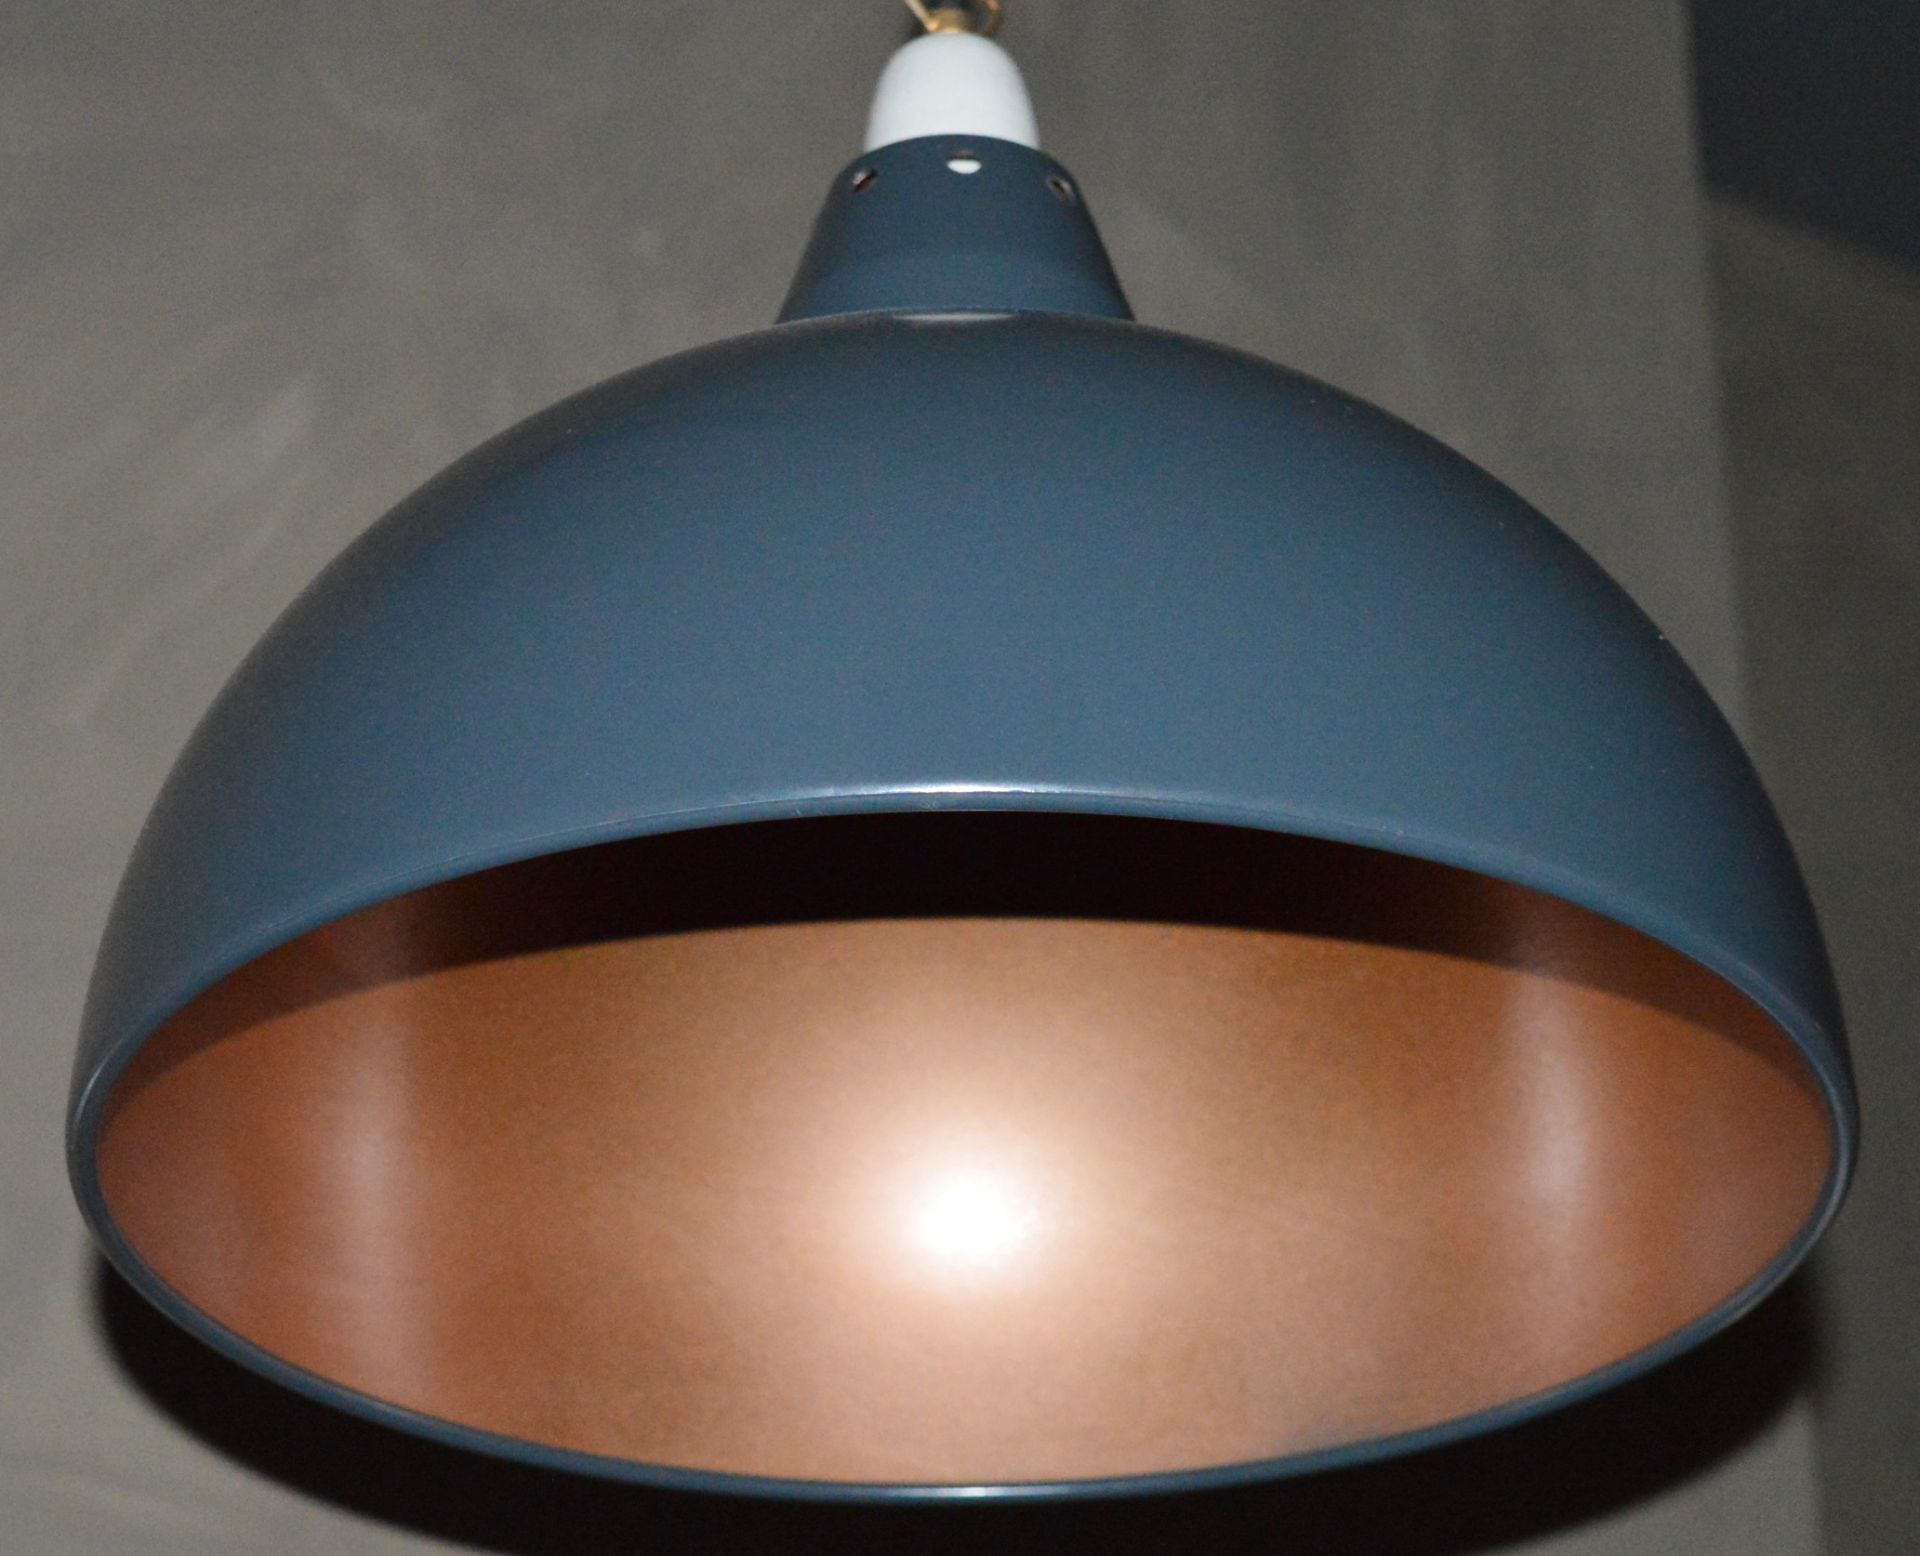 4 x Dome Pendant Ceiling Light Fittings - Grey Dome and Copper  - Vintage Style - 40cm Diameter - - Image 5 of 8